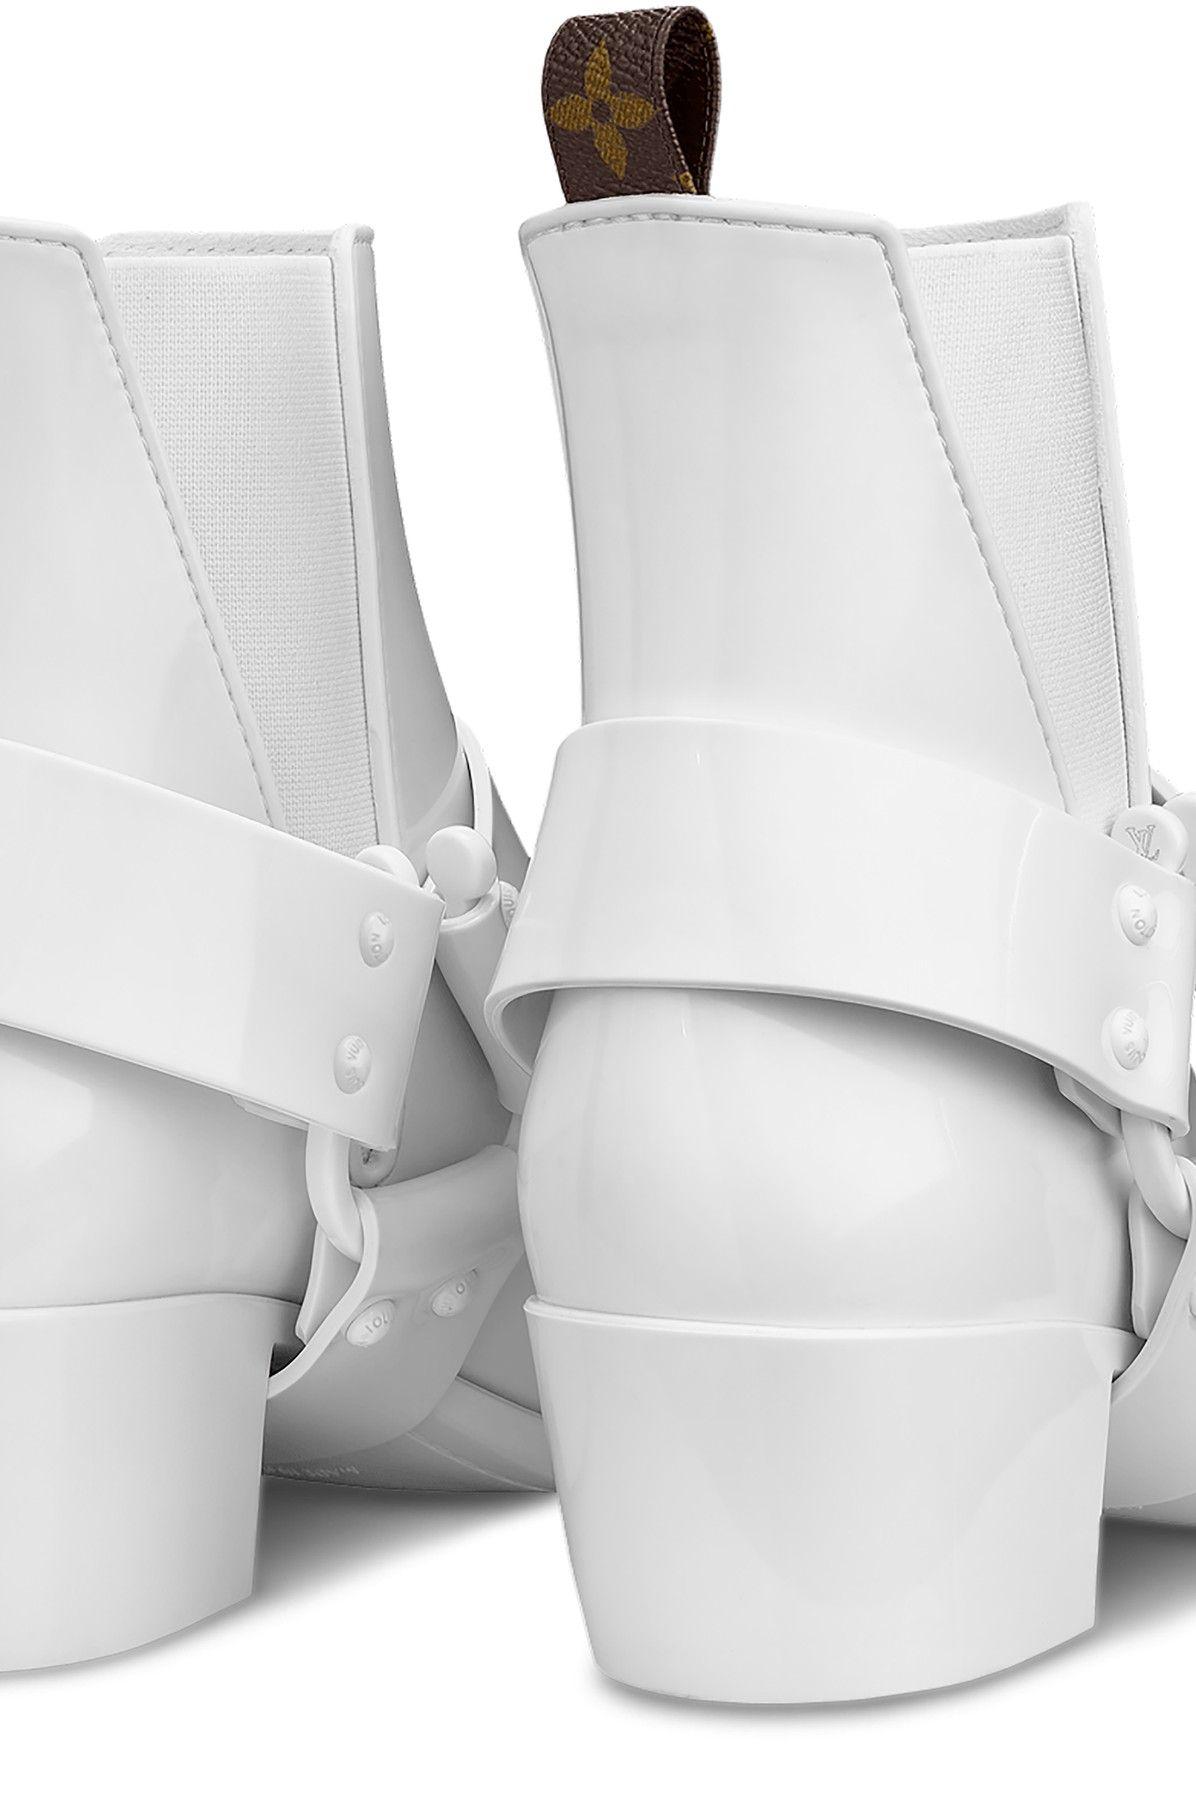 Louis Vuitton Rhapsody Ankle Boot in White